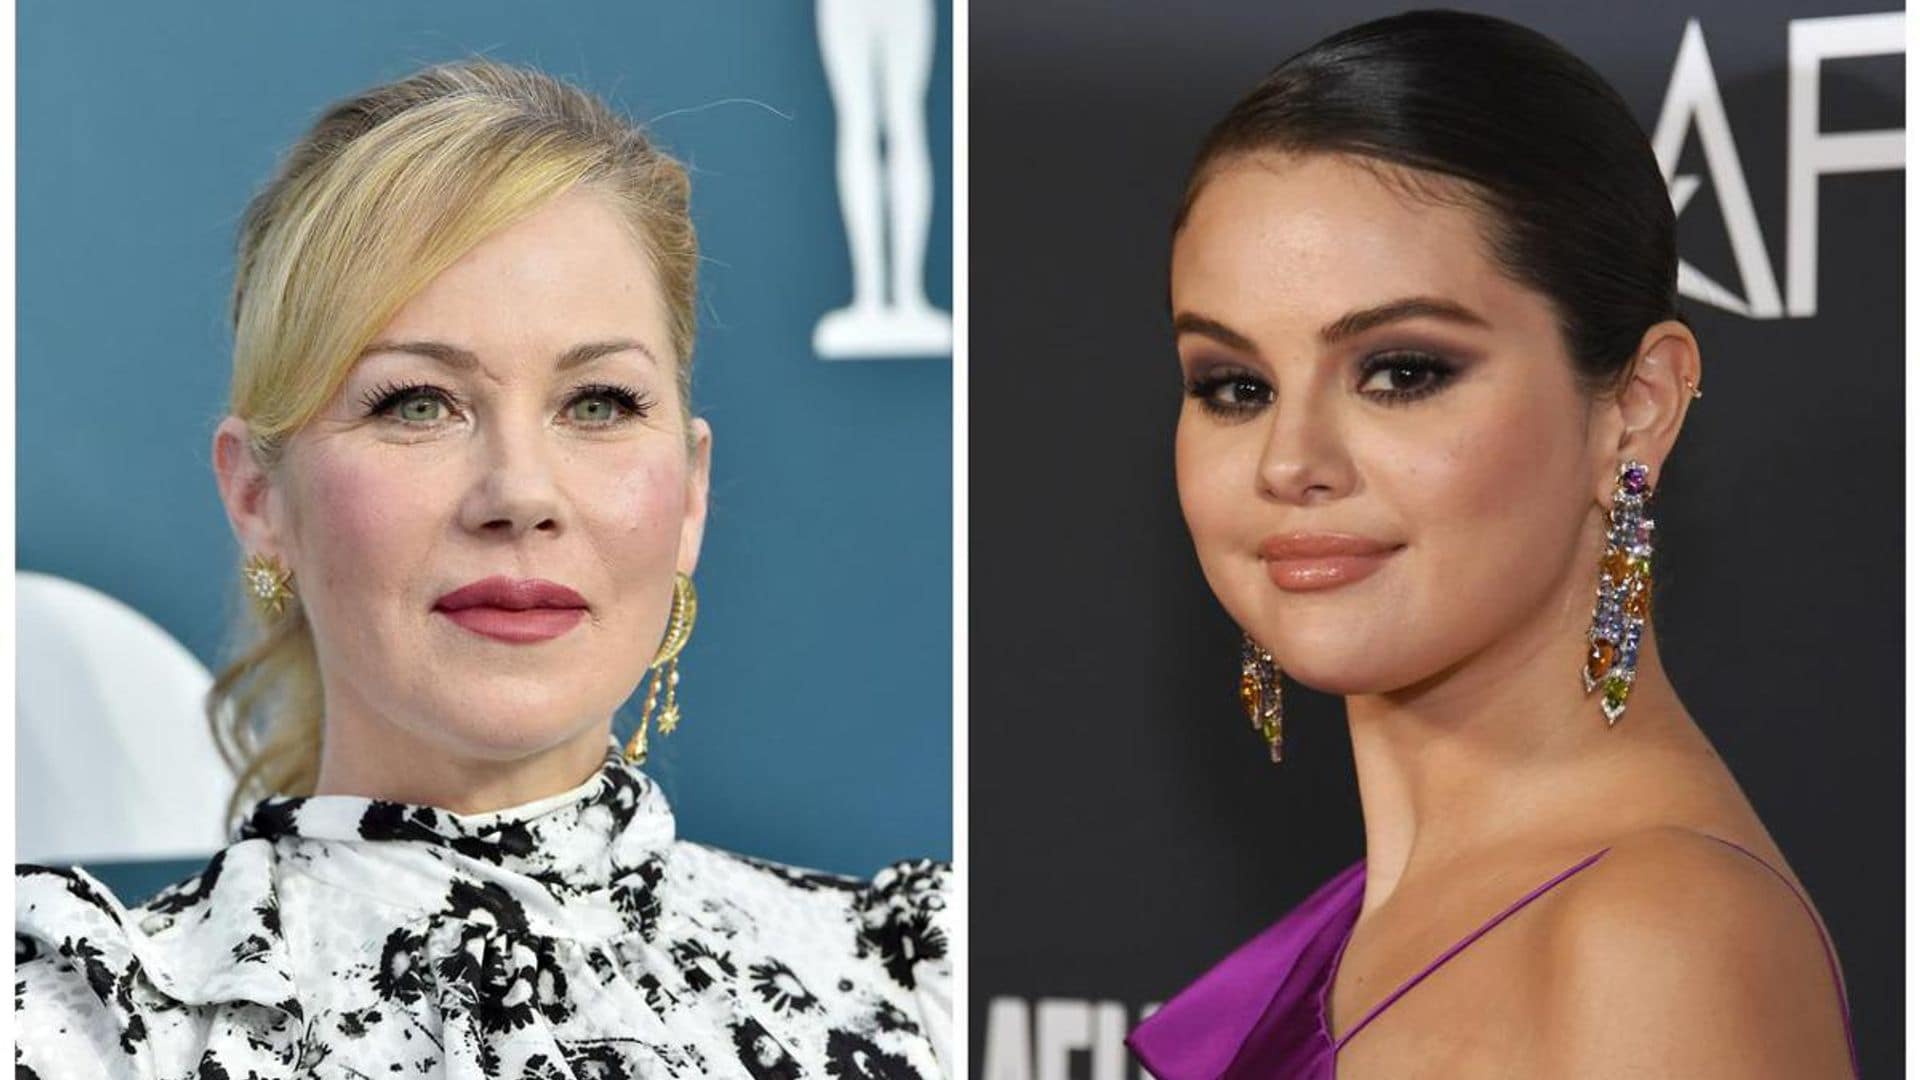 Christina Applegate thanks Selena Gomez for sharing her journey as an immunocompromised person